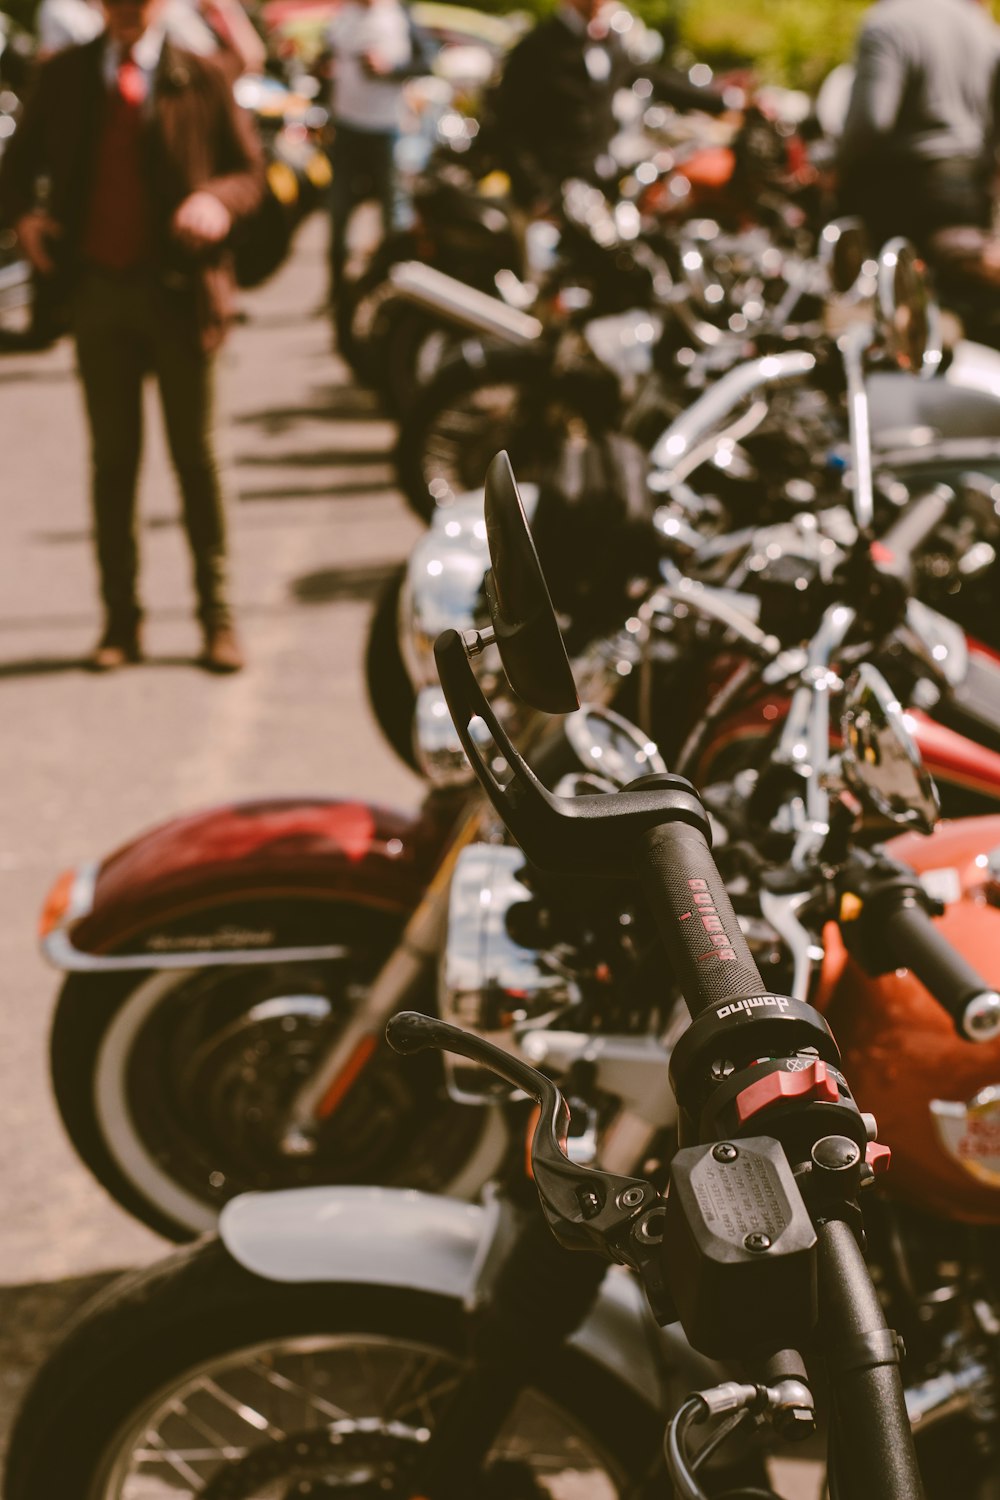 a row of motorcycles parked next to each other